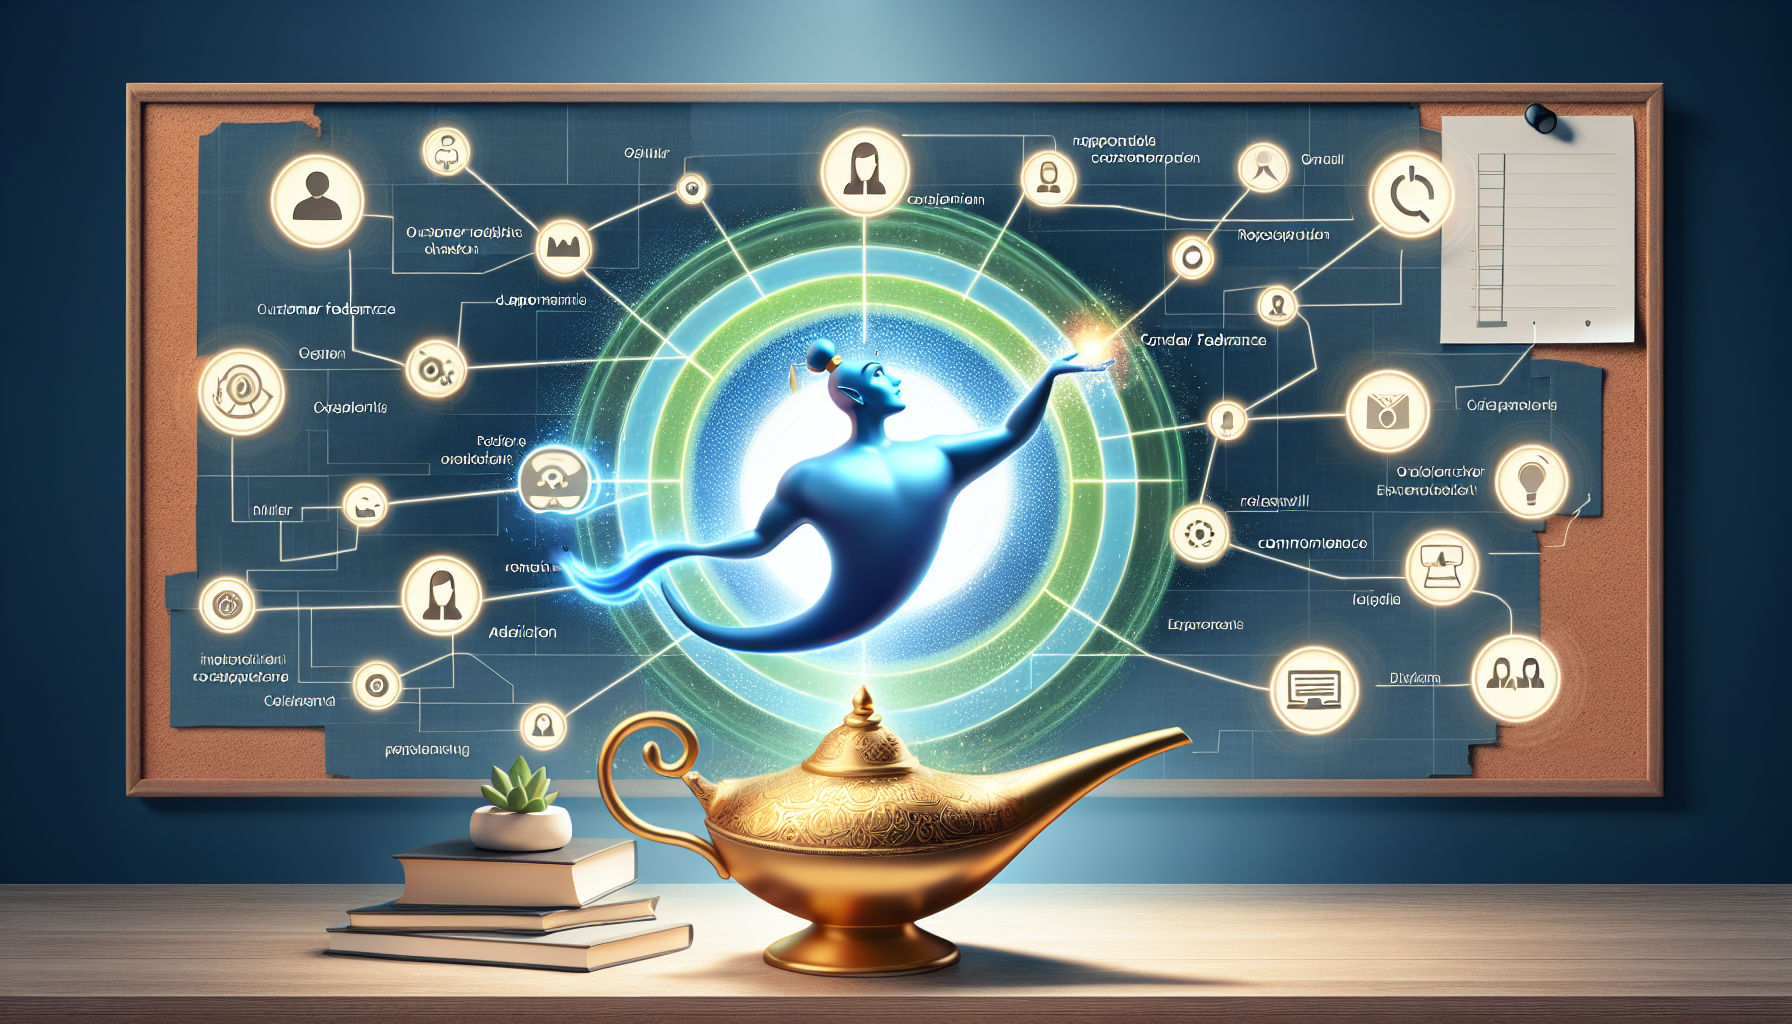 An imaginative scene shows a blue genie, dubbed the CX Genie, emerging from a golden lamp on a table with a stack of books, a small plant, and a connected diagram in the background illustrating various interconnected concepts.